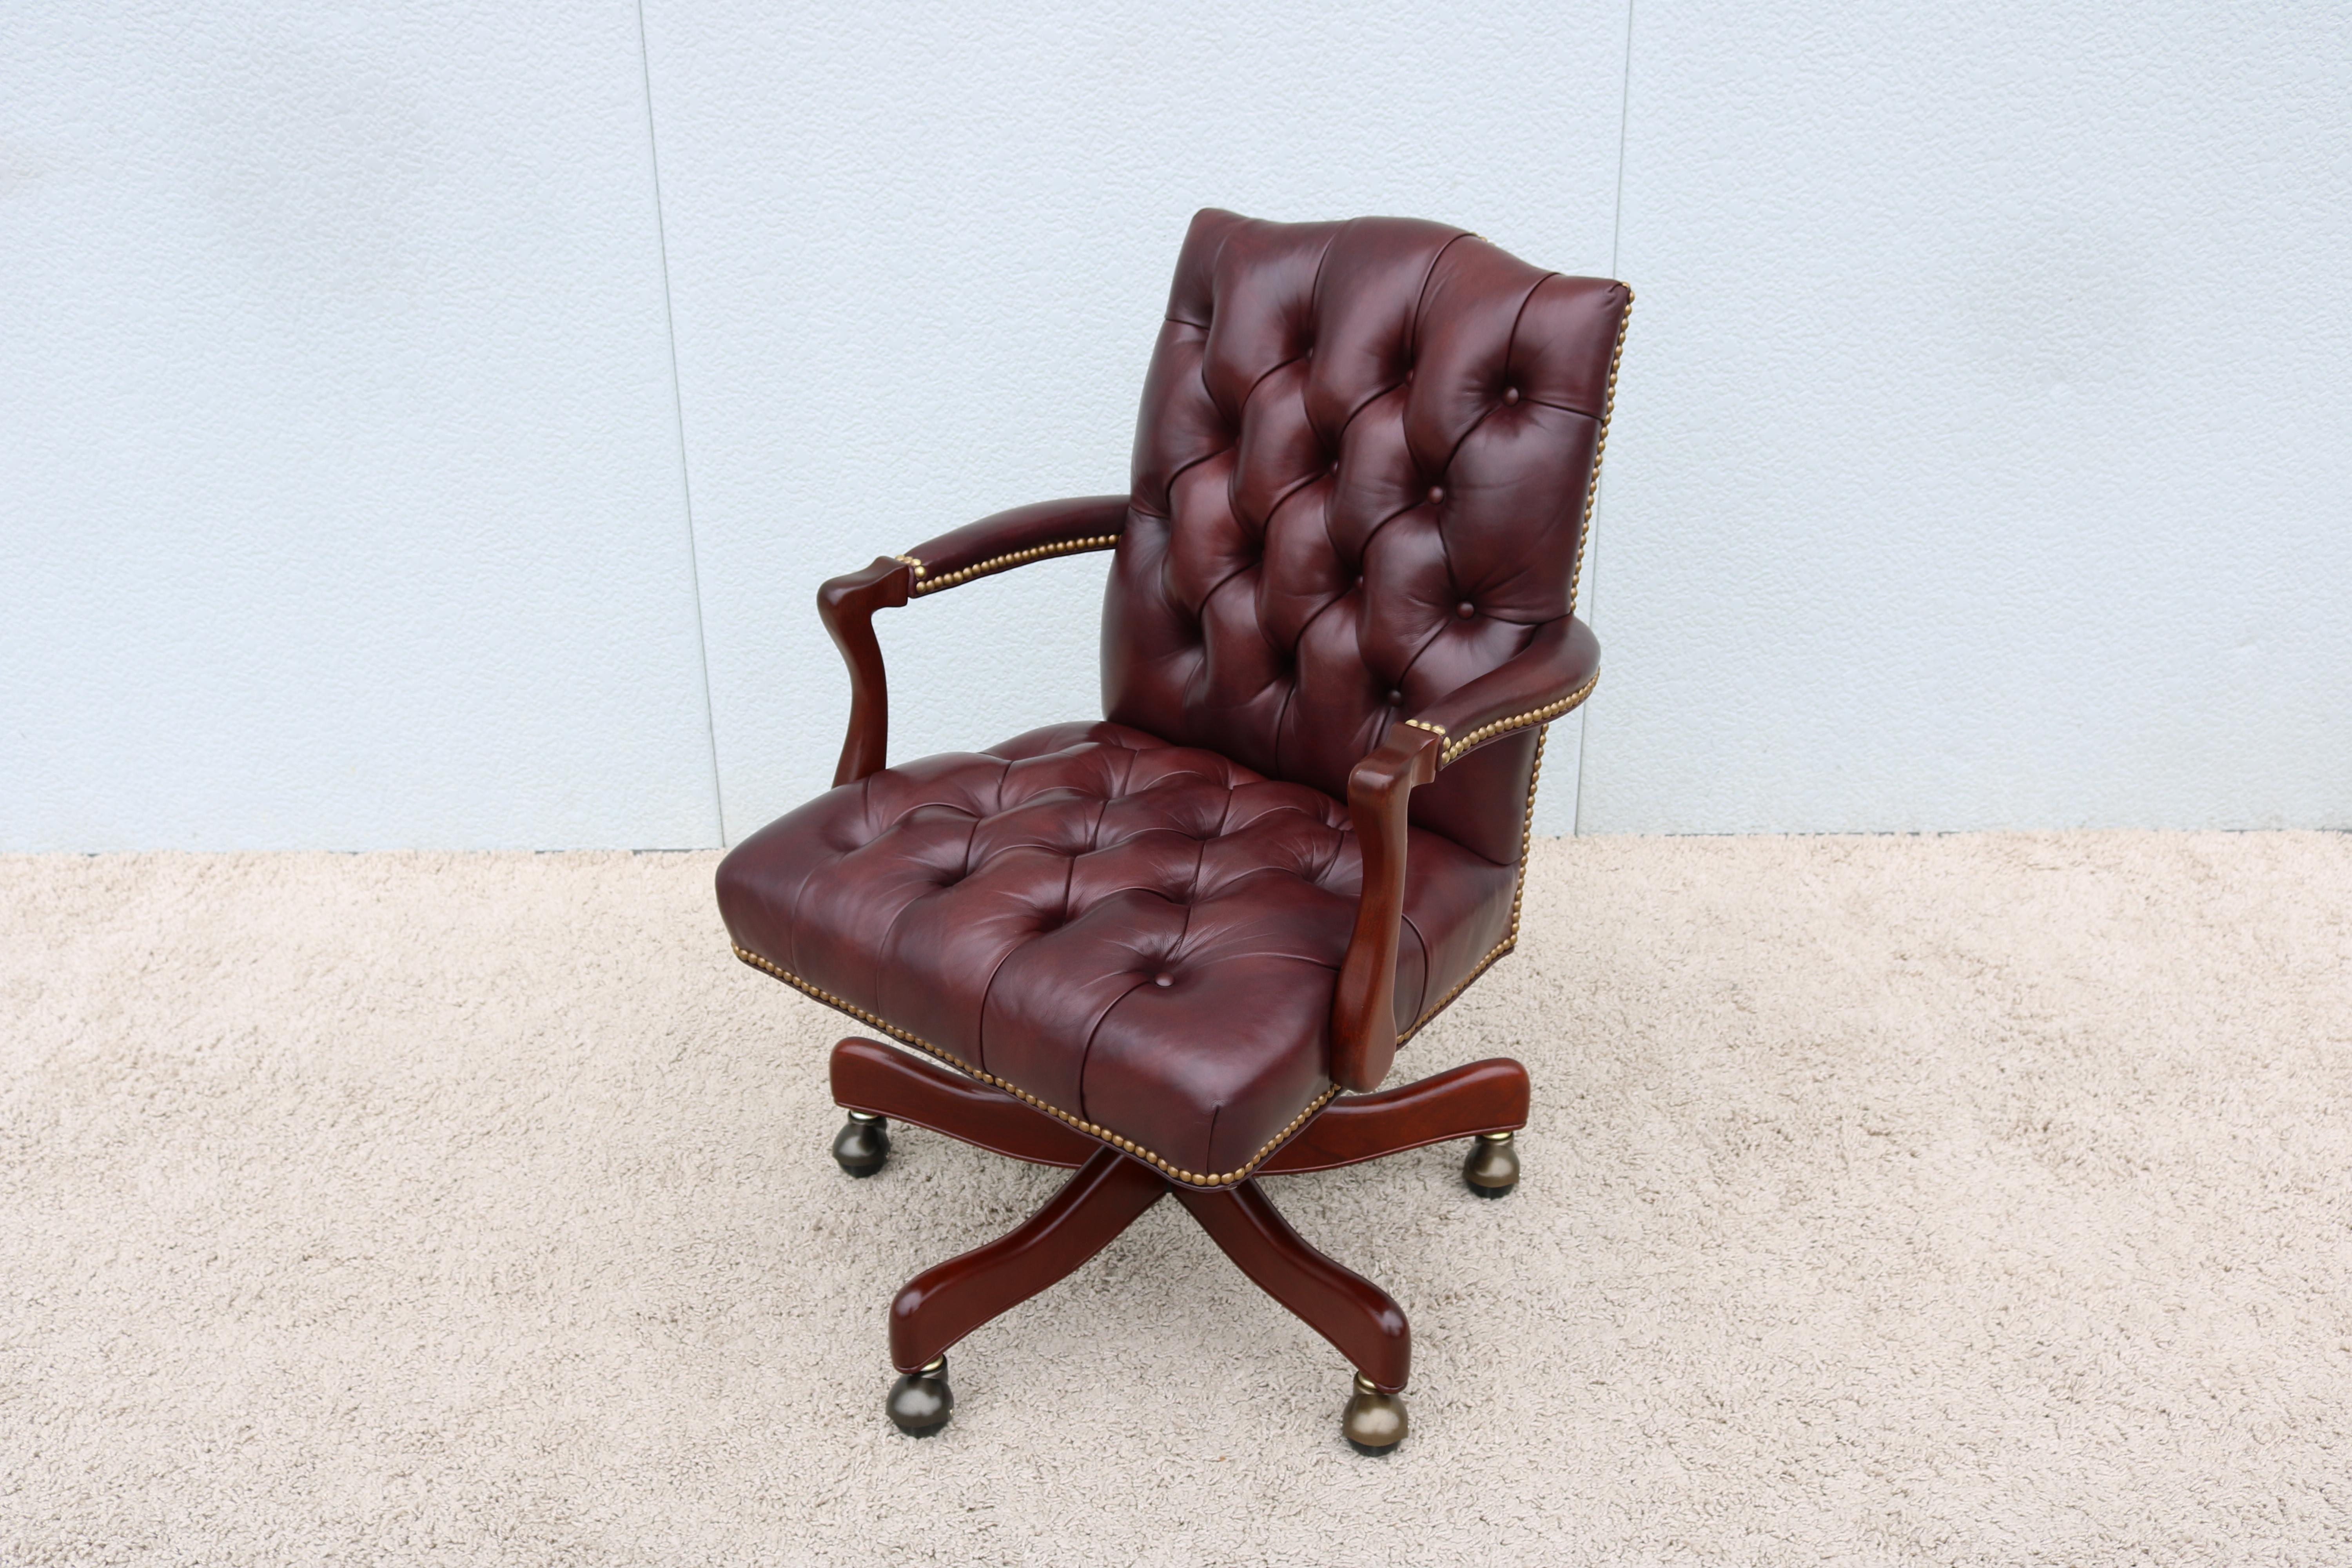 Fabulous traditional Graham deep button tufted leather swivel and tilt executive desk chair by Cabot Wrenn. 
A classic timeless and luxurious style inspired by the 18th and 19th century design.
Beautifully handcrafted by skilled artisans using